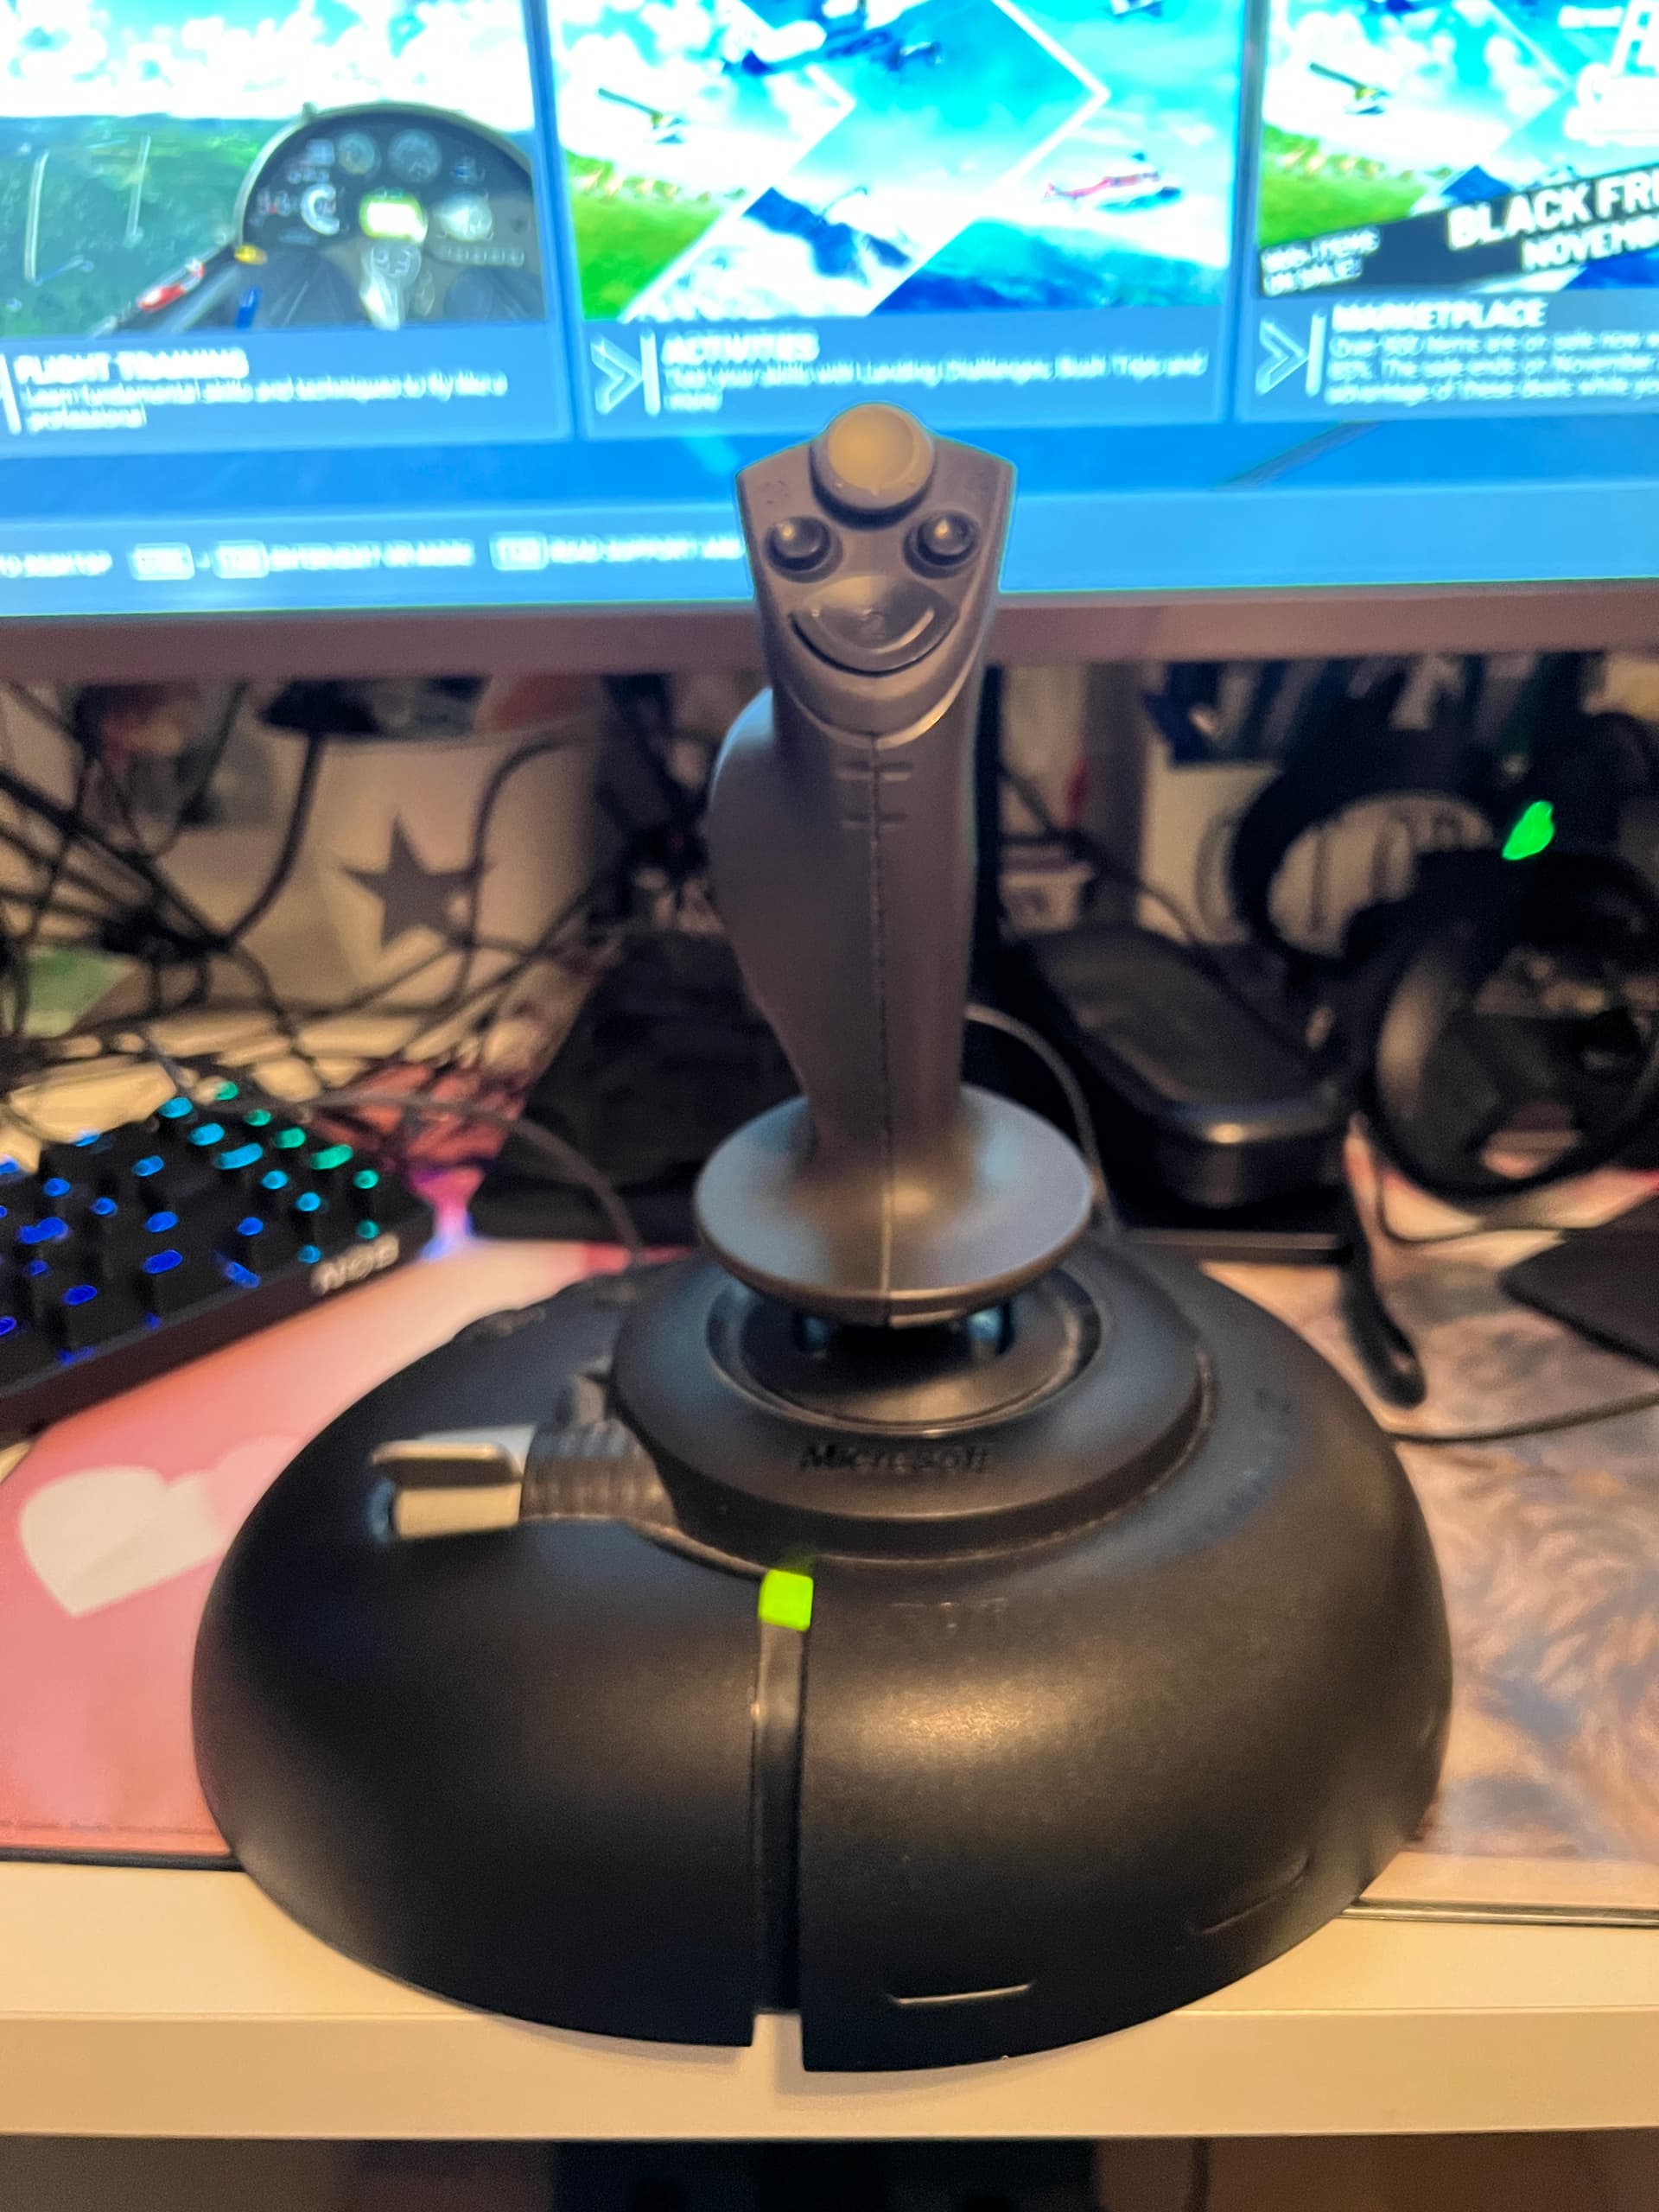 Won Soms soms gordijn This "schtick" is 22+ years and still playing the game like a pro! - whats  your oldest HW? - General Discussion - Microsoft Flight Simulator Forums